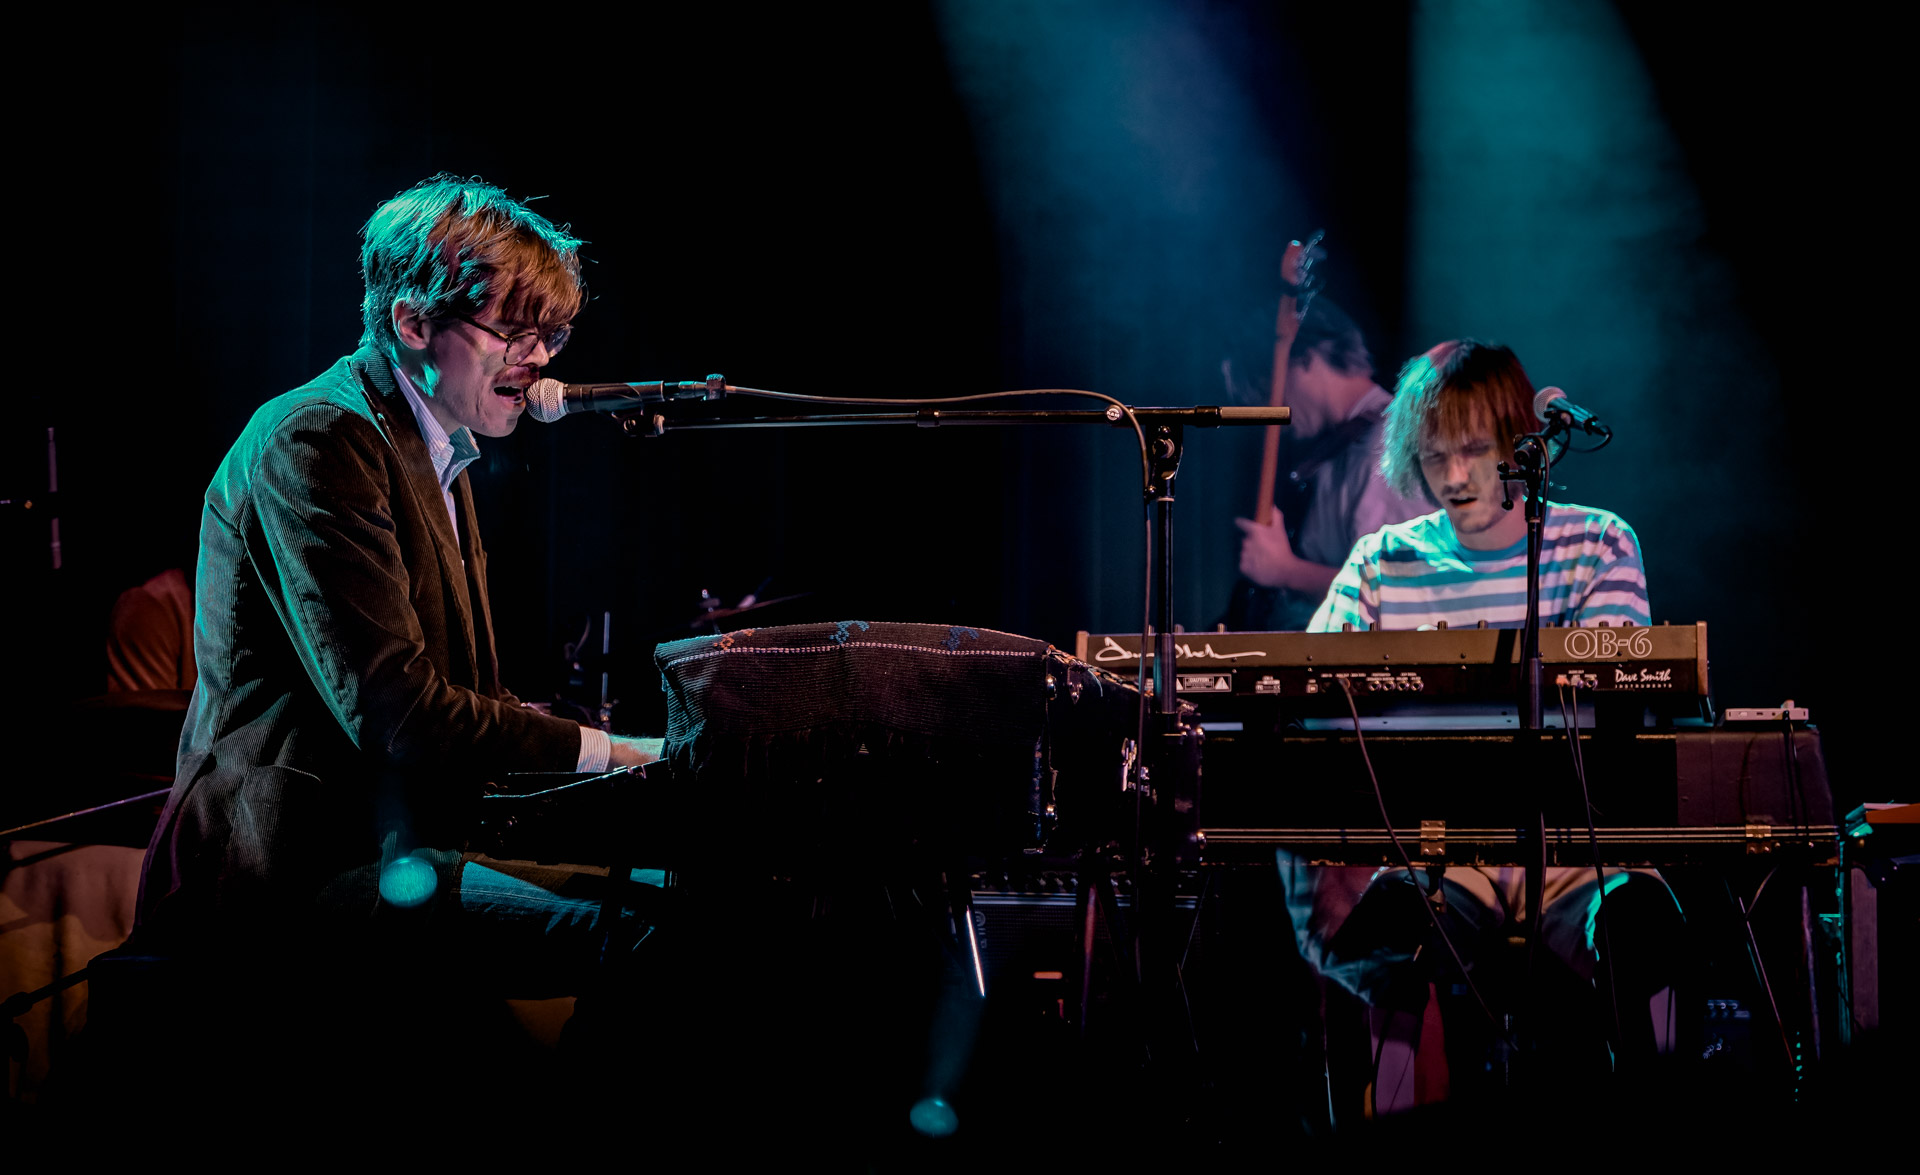 Two musicians playing keyboard on stage